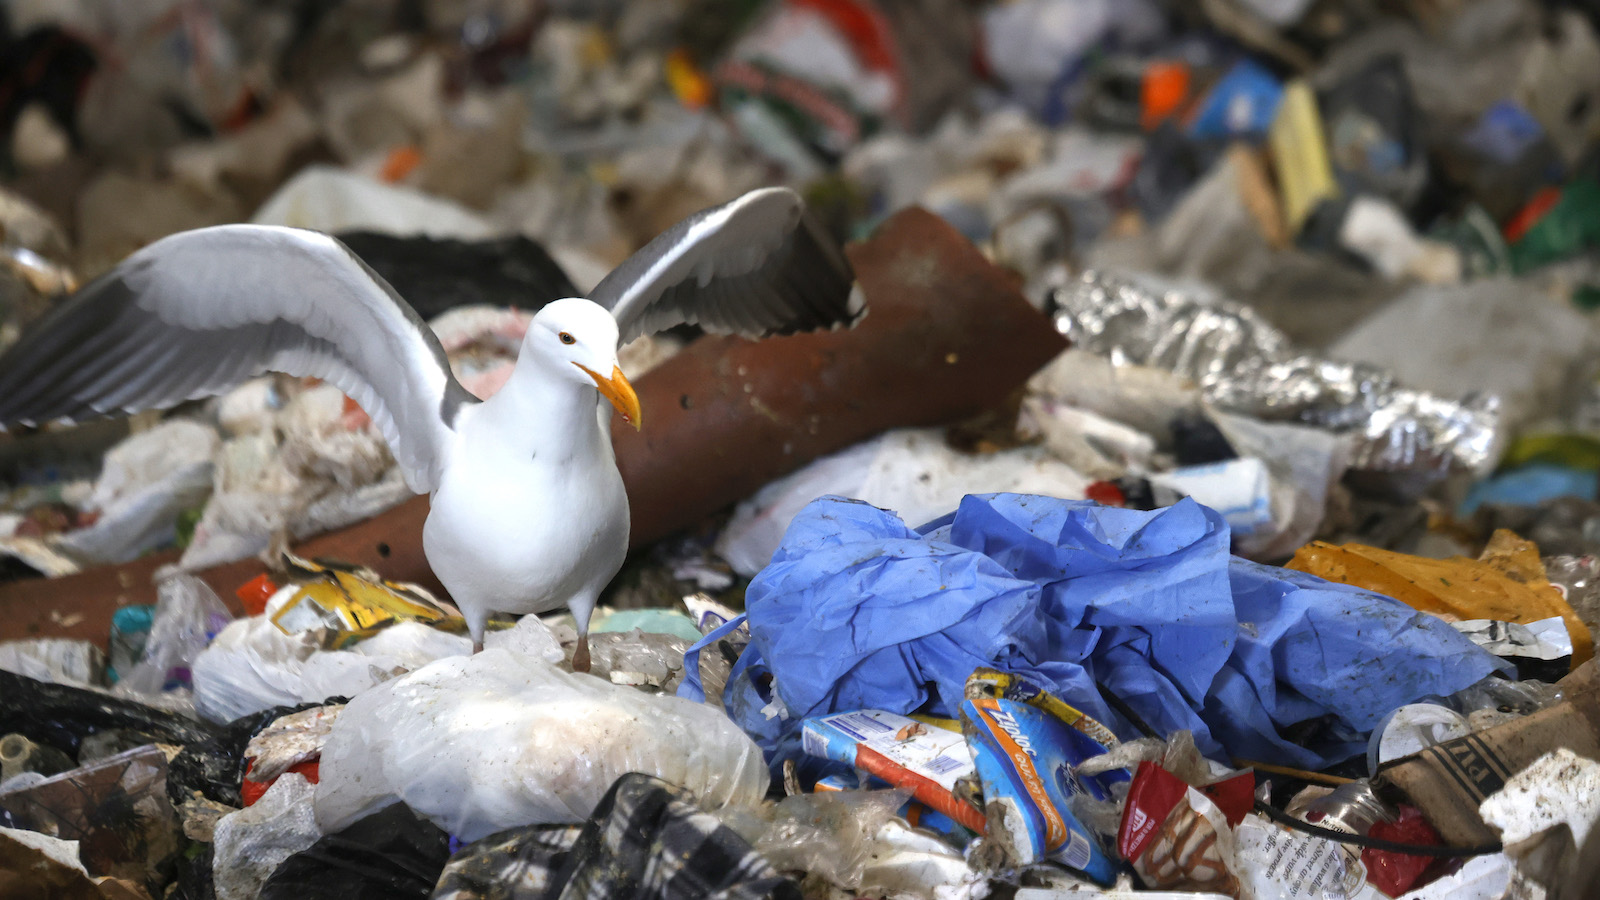 A seagull alights on plastic pollution